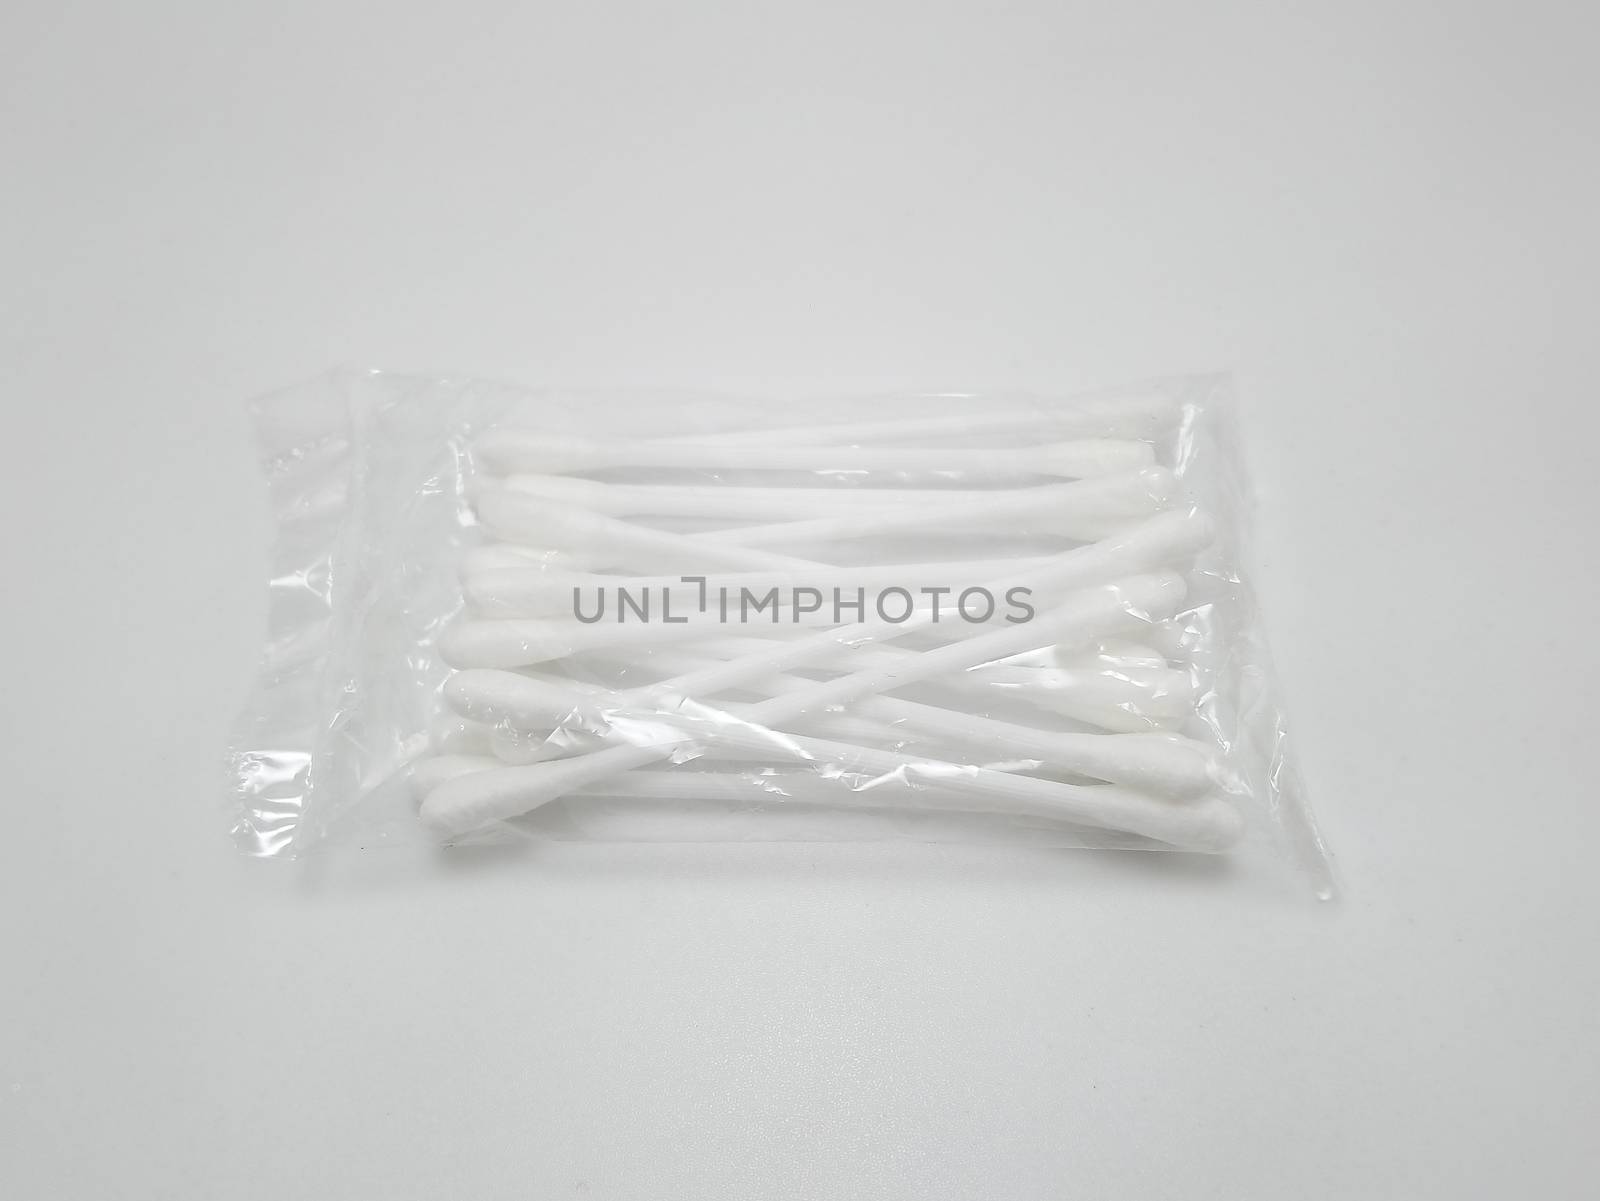 Cotton buds placed in the plastic use to clean ears by imwaltersy